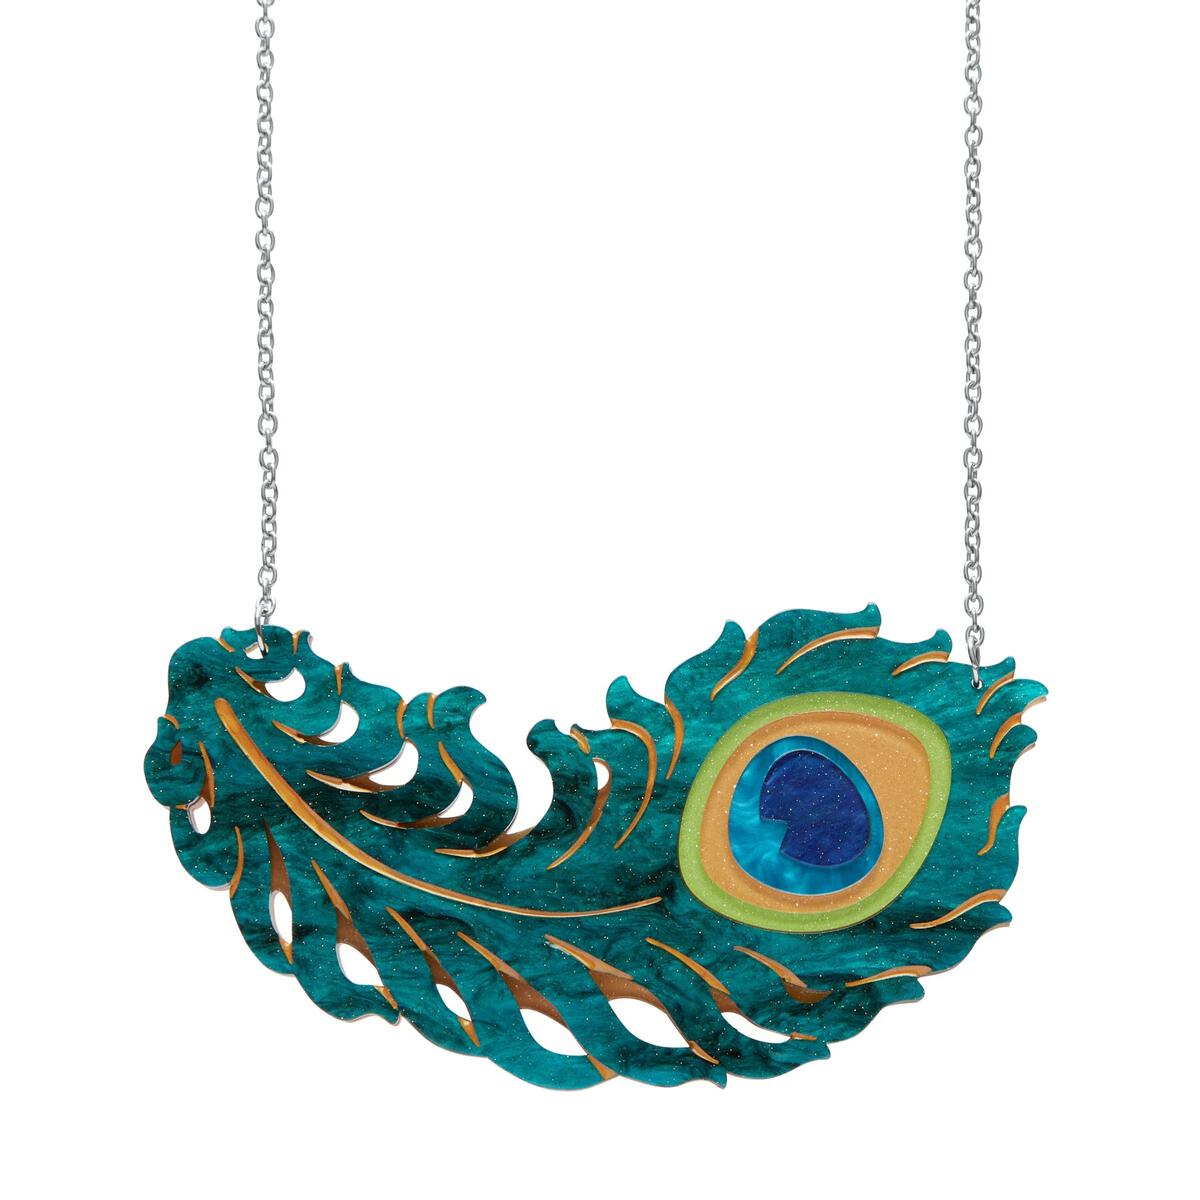 Art Nouveau Collection "The Royal Eye" peacock feather layered resin pendant on 17" - 21" adjustable silver metal chain